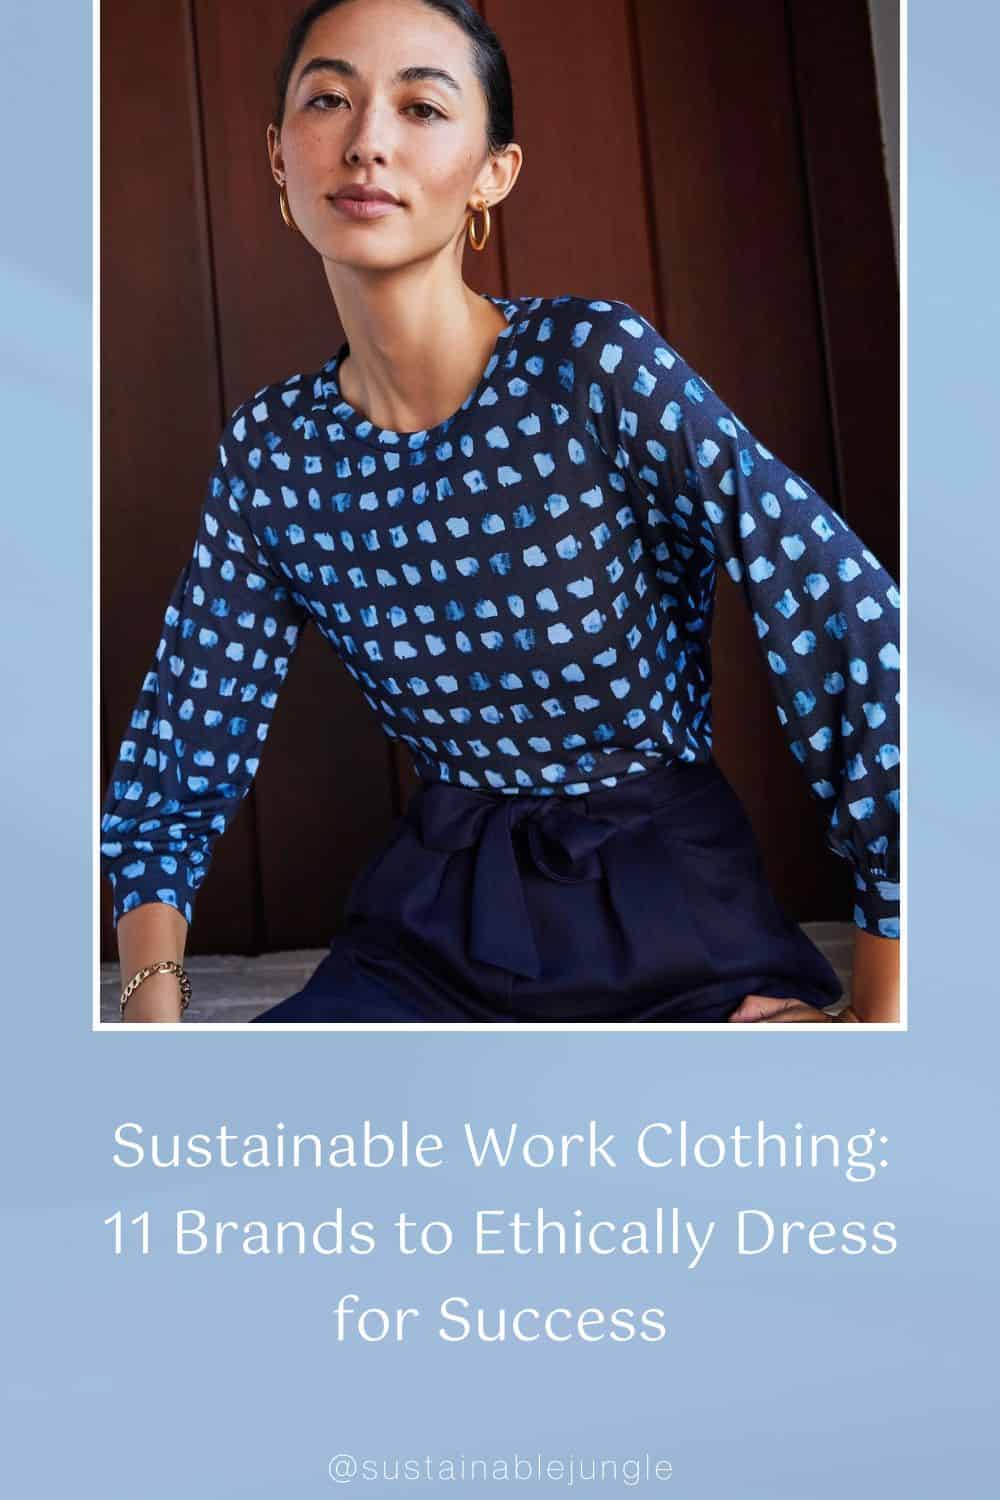 Sustainable Work Clothing: 11 Brands to Ethically Dress for Success #sustainableworkclothing #sustainableclothingforwork #sustainableclothingbrandsforwork #sustainableworkclothes #sustainableworkwear #ethicalworkclothing #sustainablejungle Image by M.M.LaFleur 